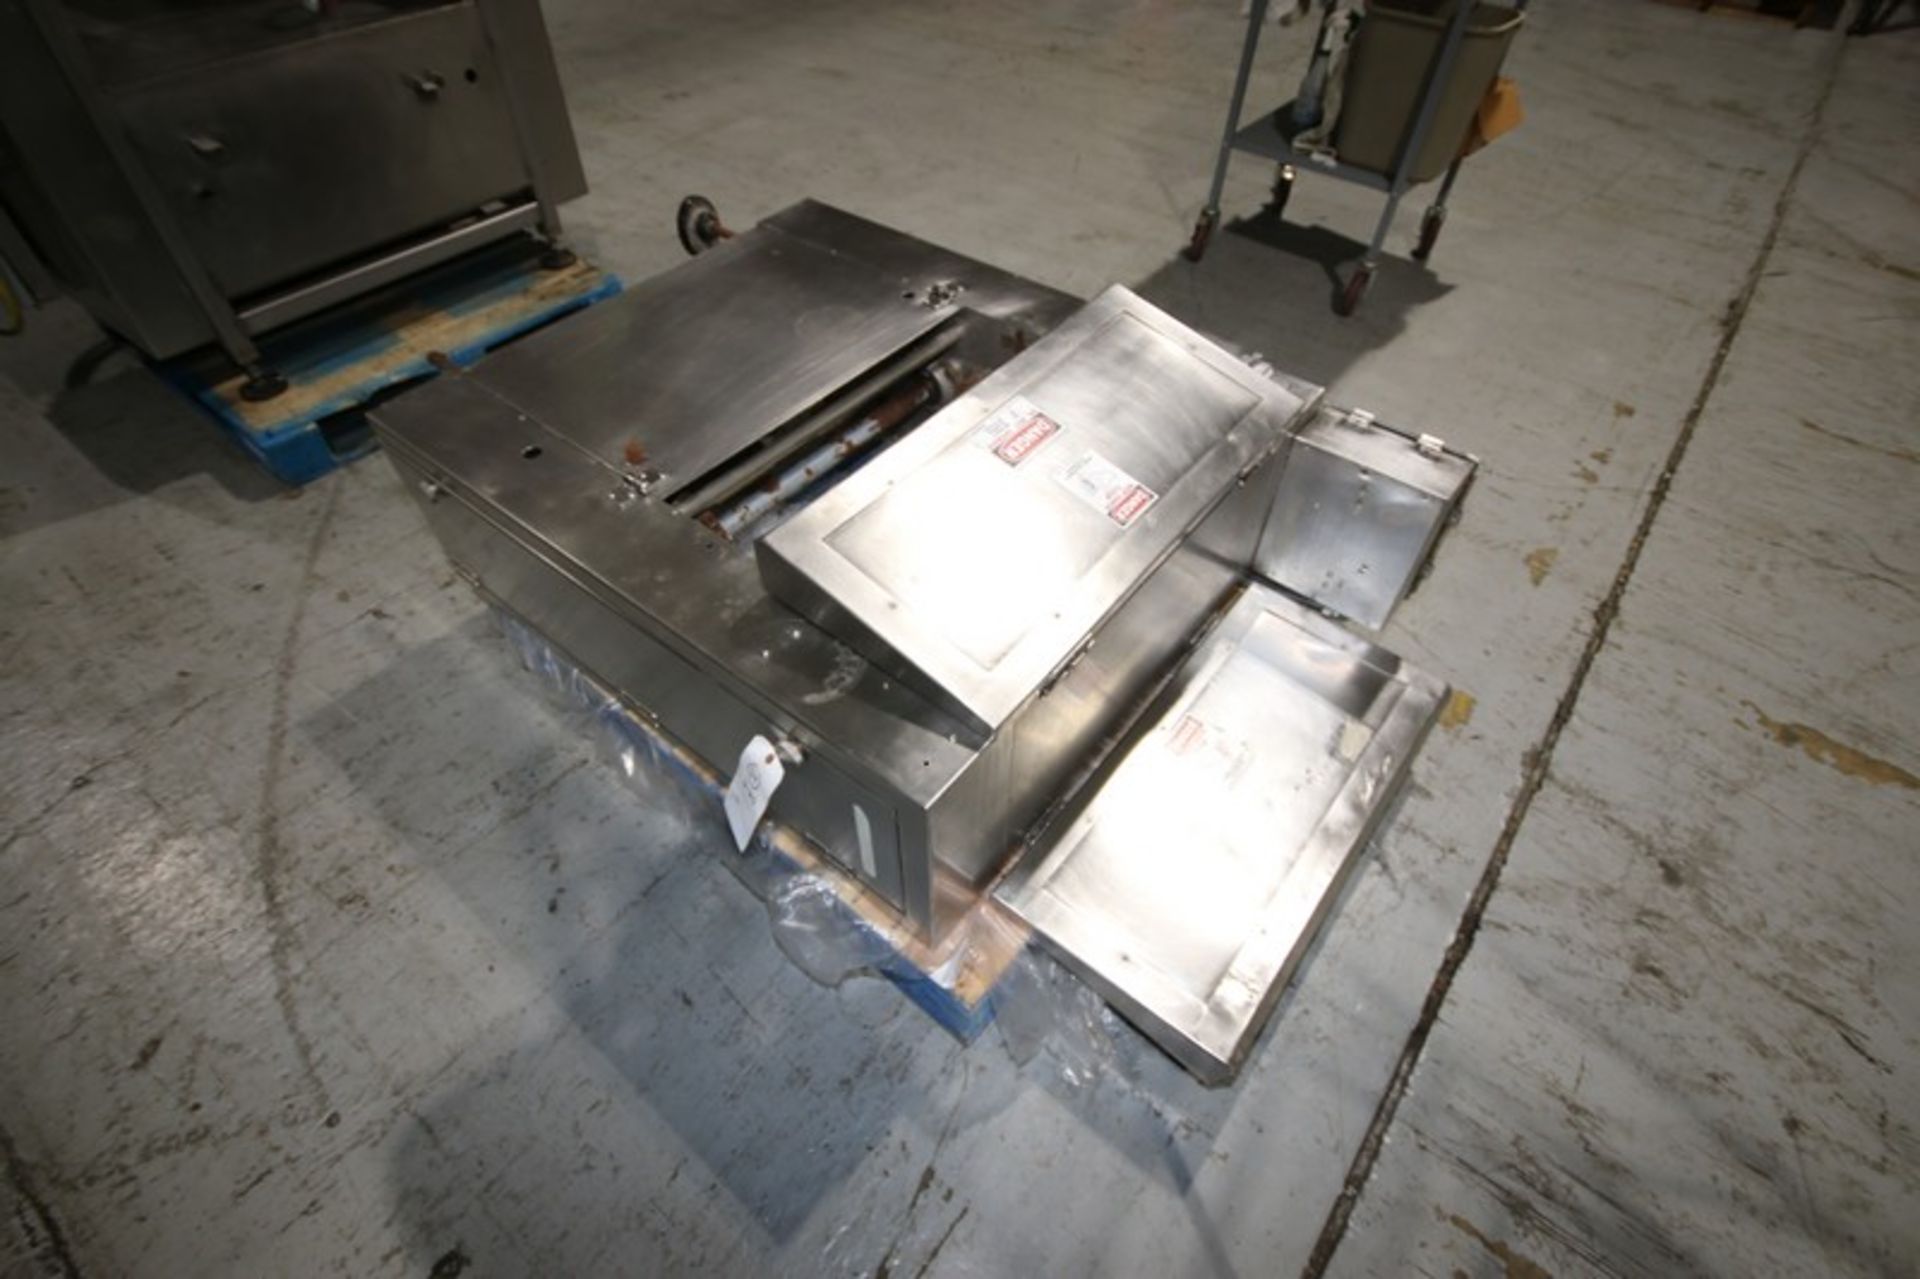 Moline 23-1/2" W S/S Guillotine, with Aprox.24-1/2" L x 8-1/2" W Cutting Table, Mounted on S/S Frame - Image 5 of 7